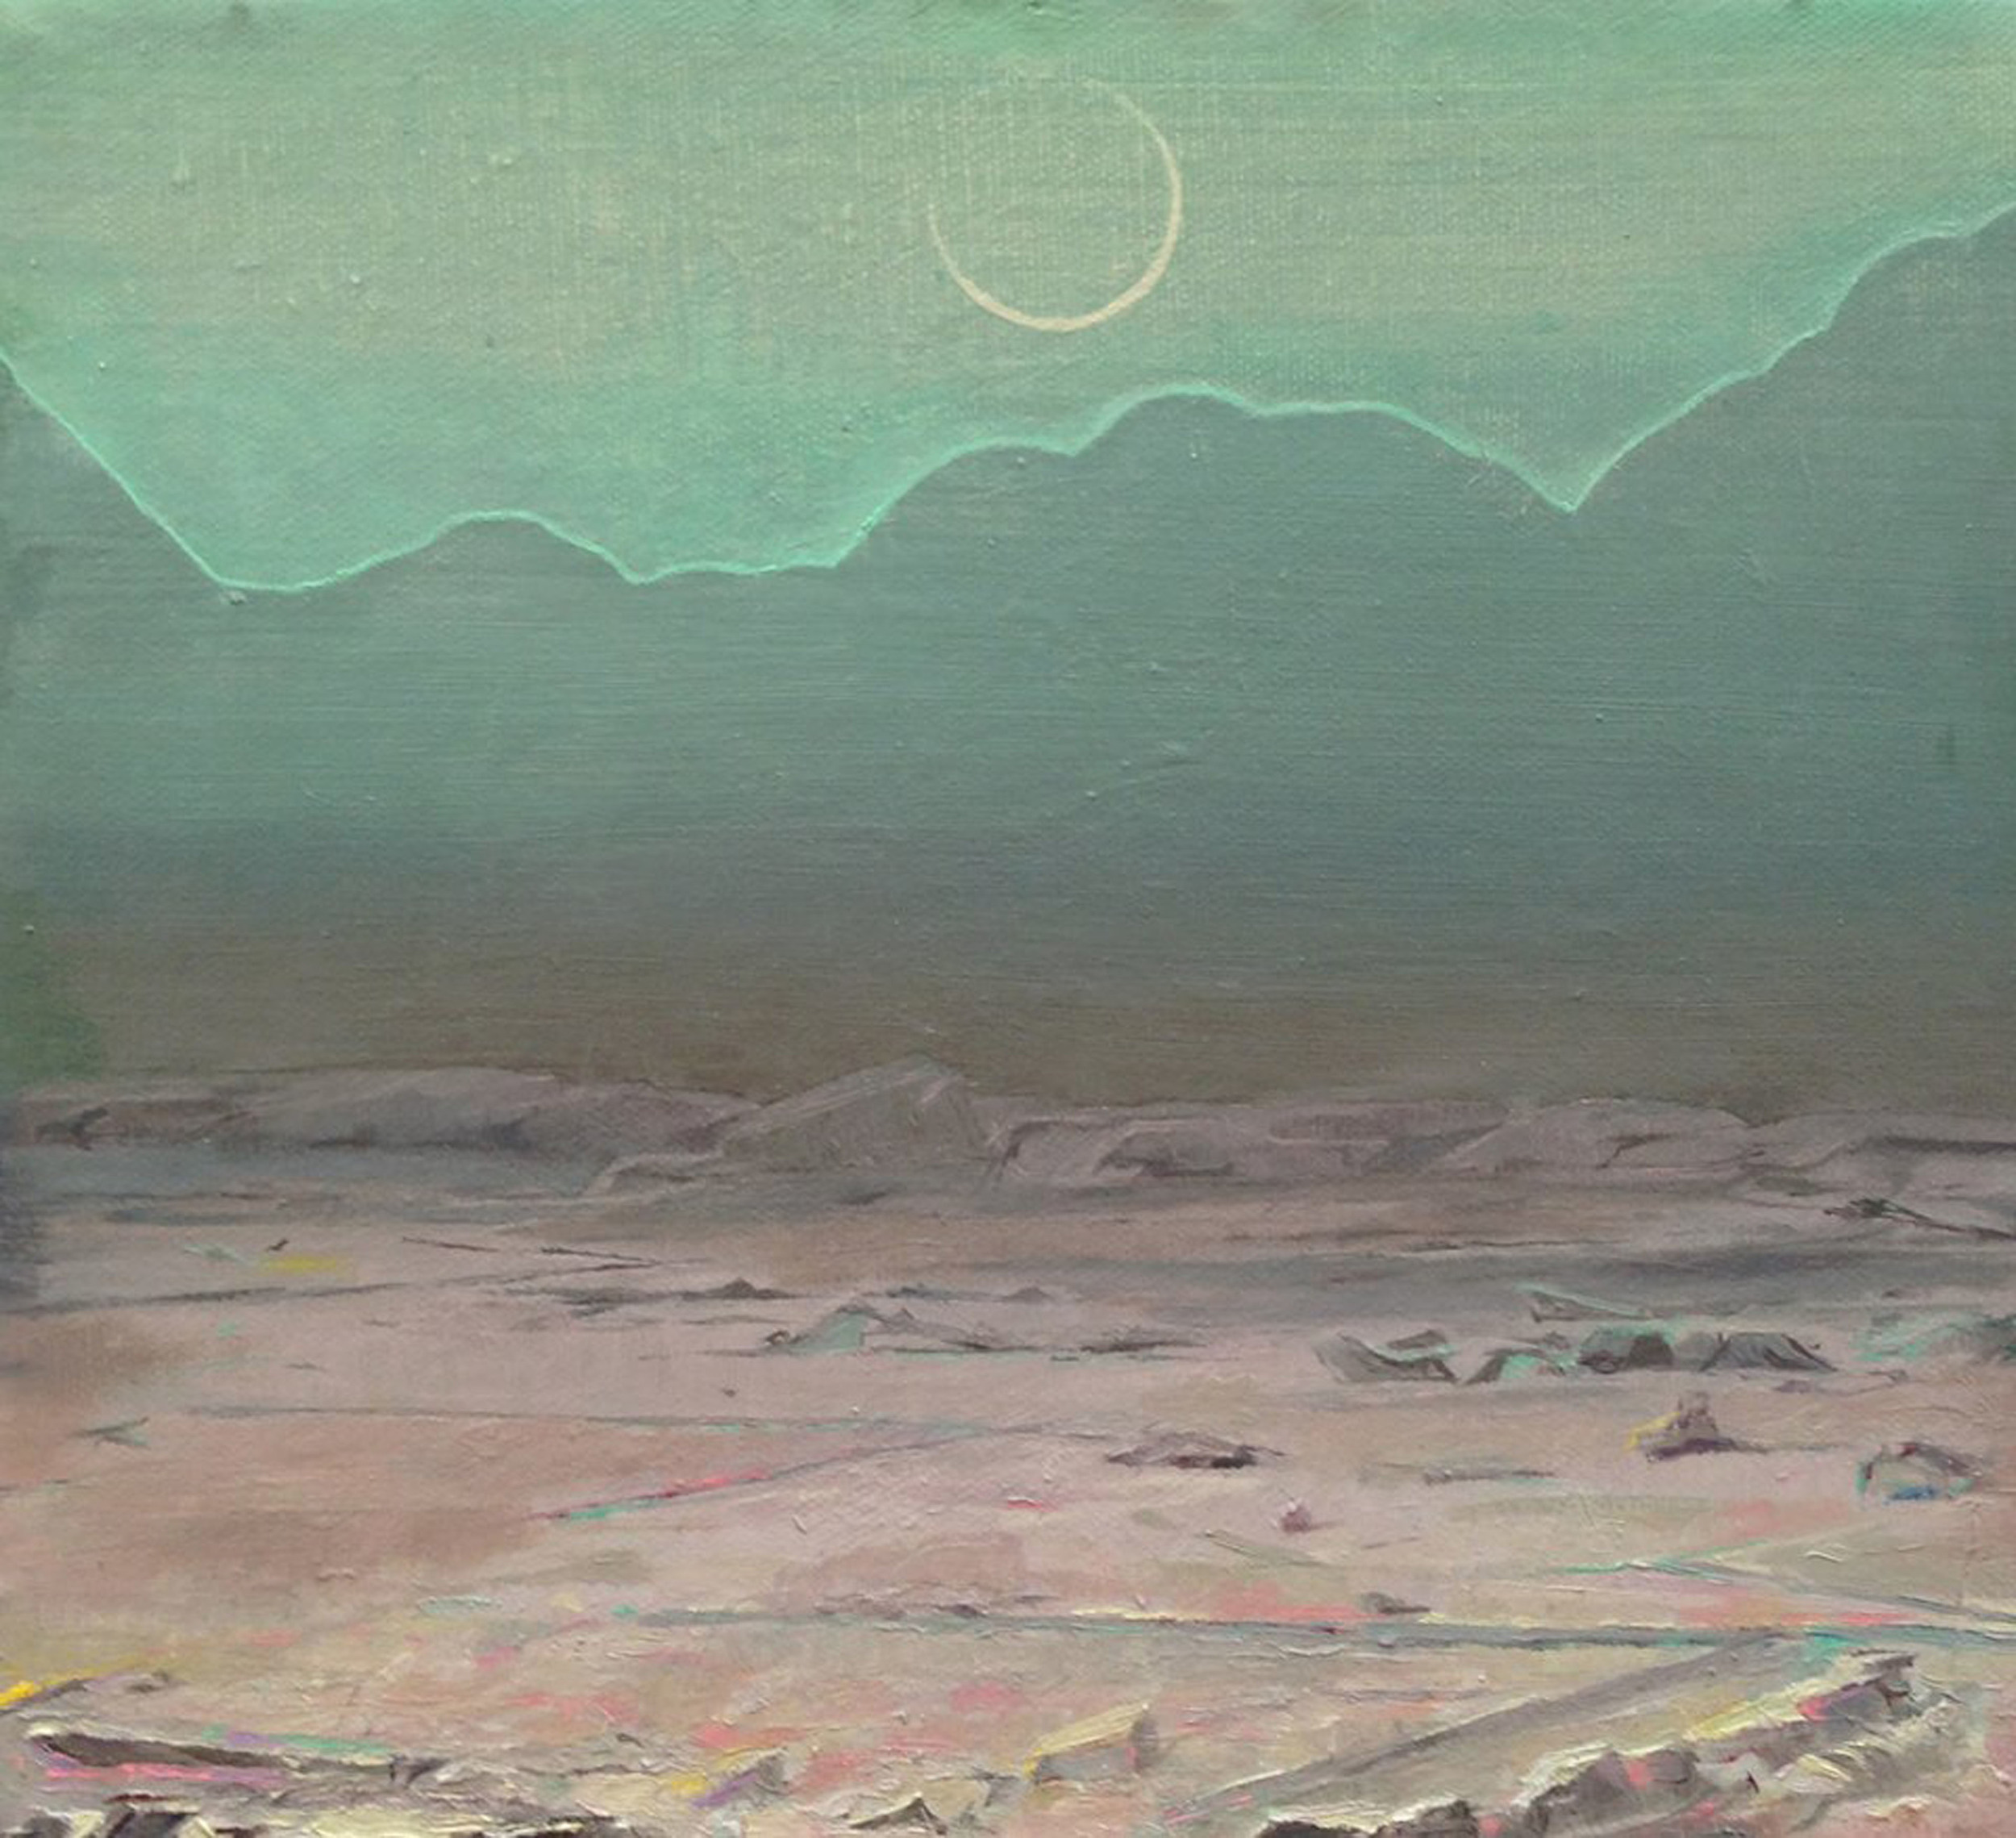  "New Moon," 2014, oil on canvas, 10x9 in. 